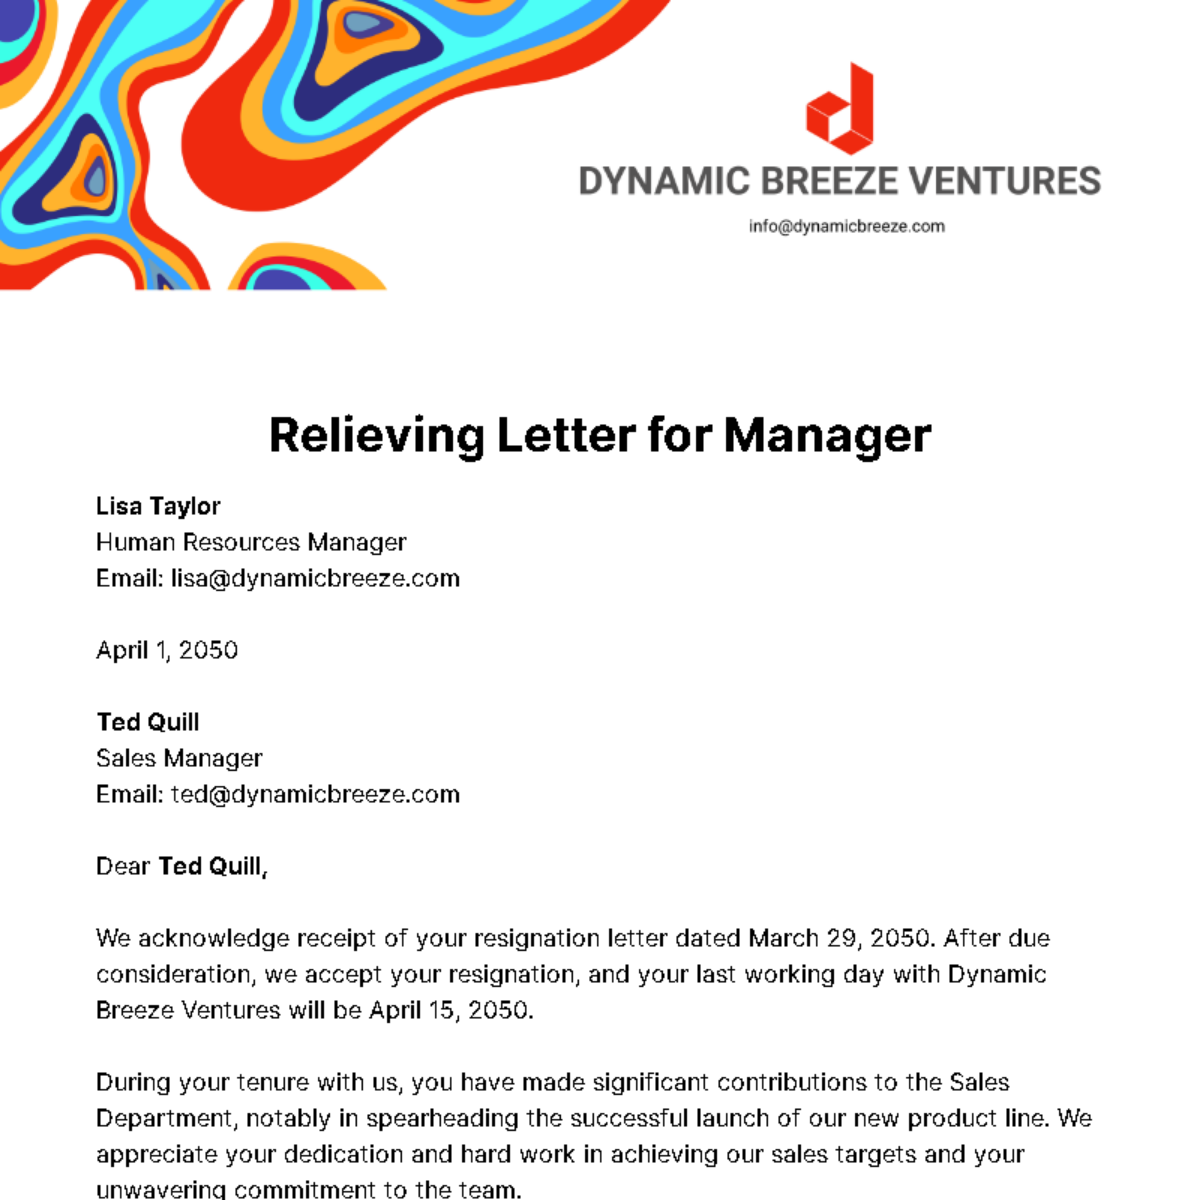 Relieving Letter for Manager Template